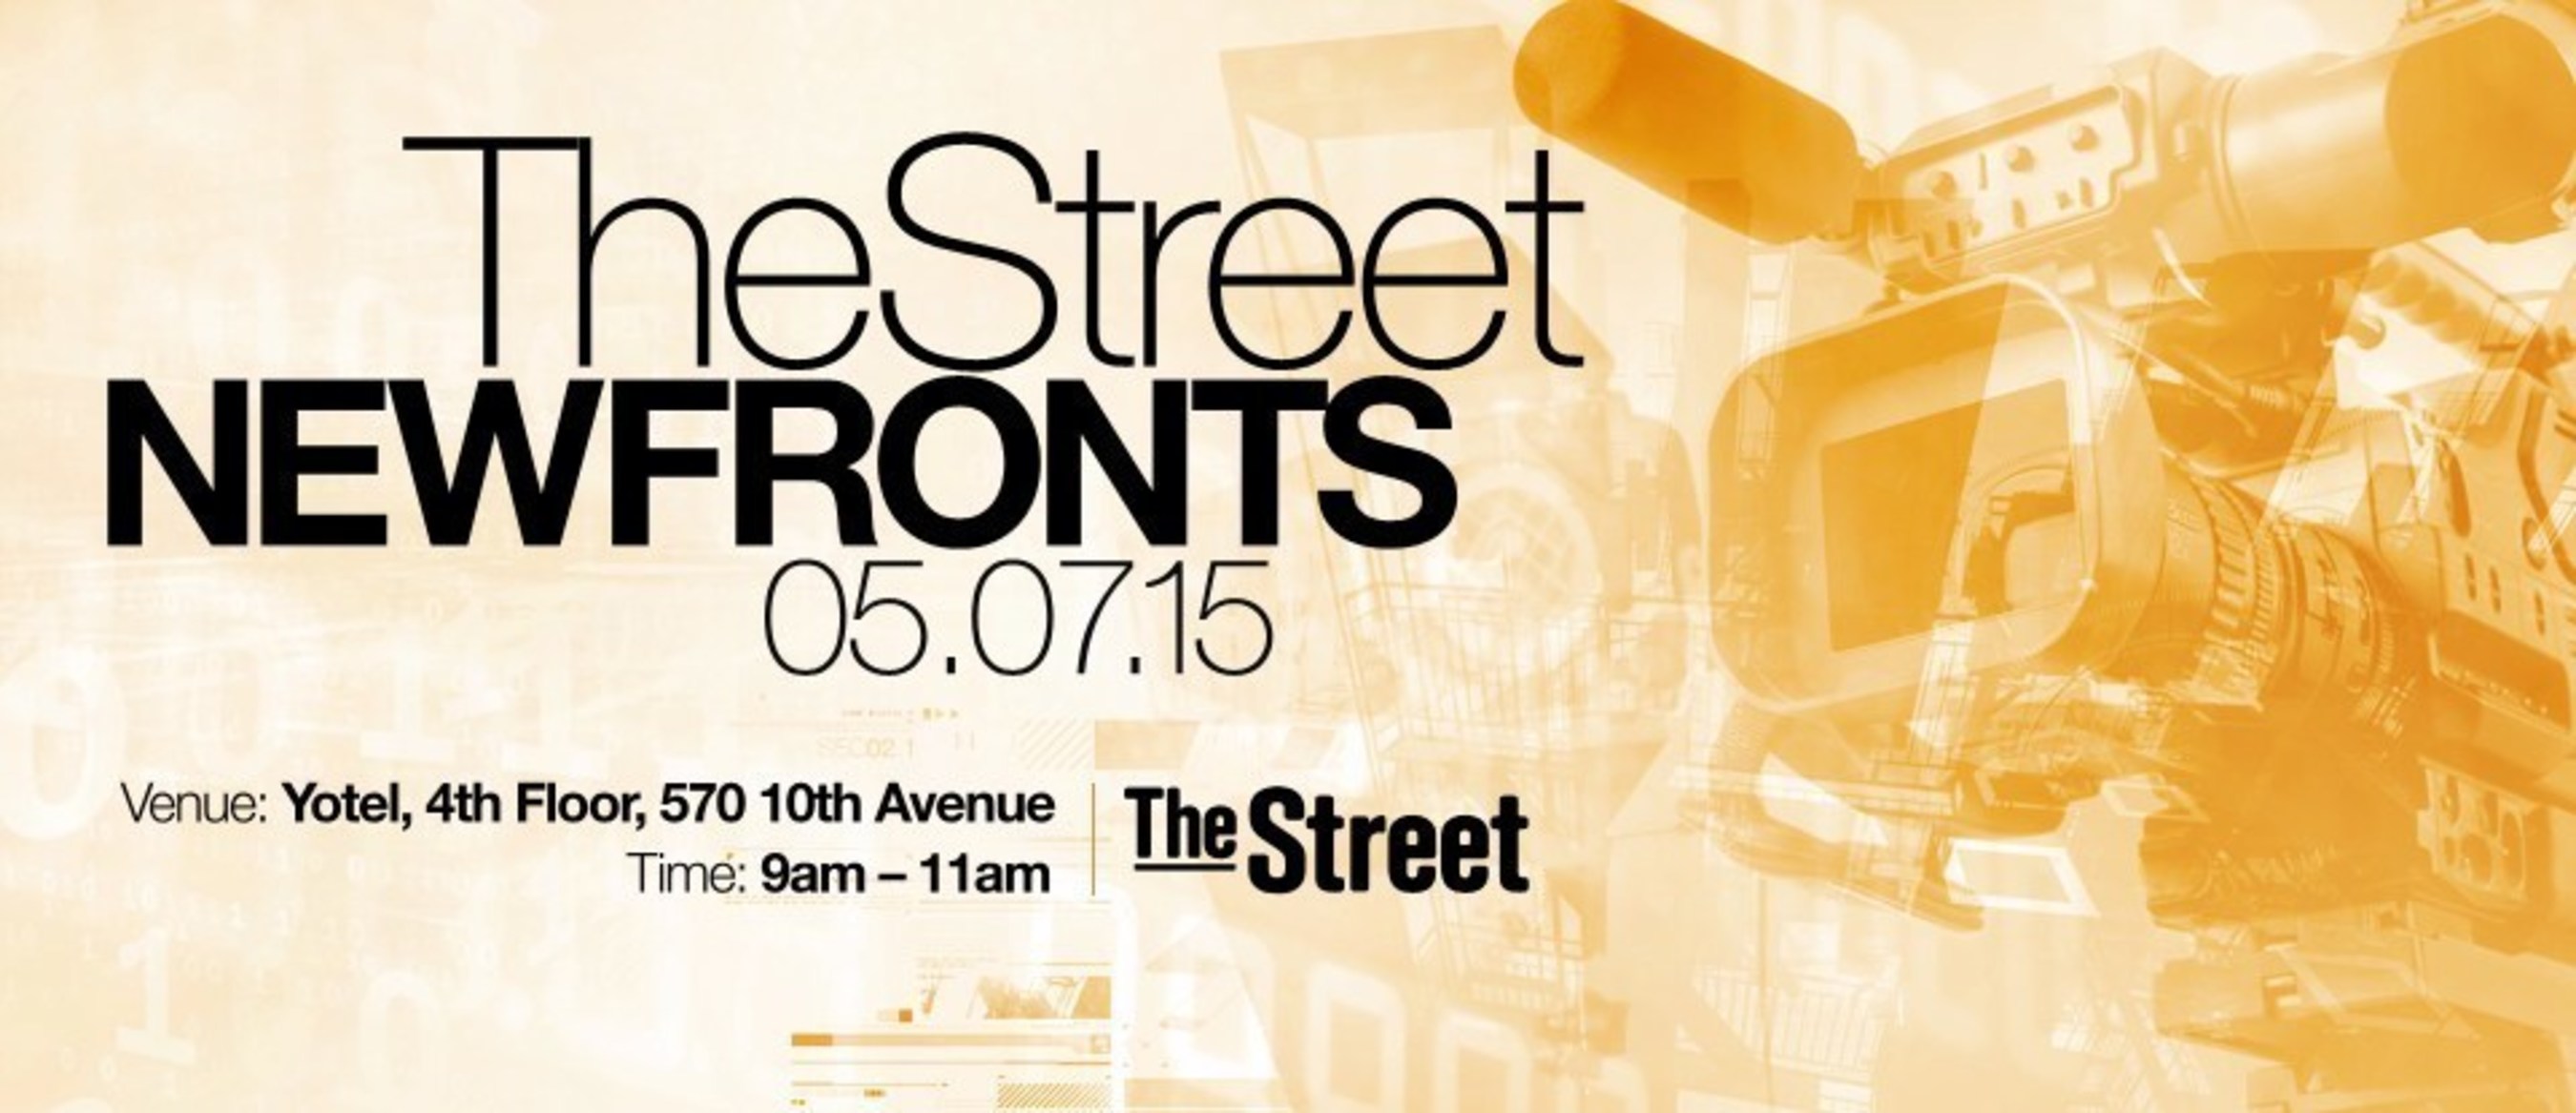 TheStreet at NewFronts 05.07.15